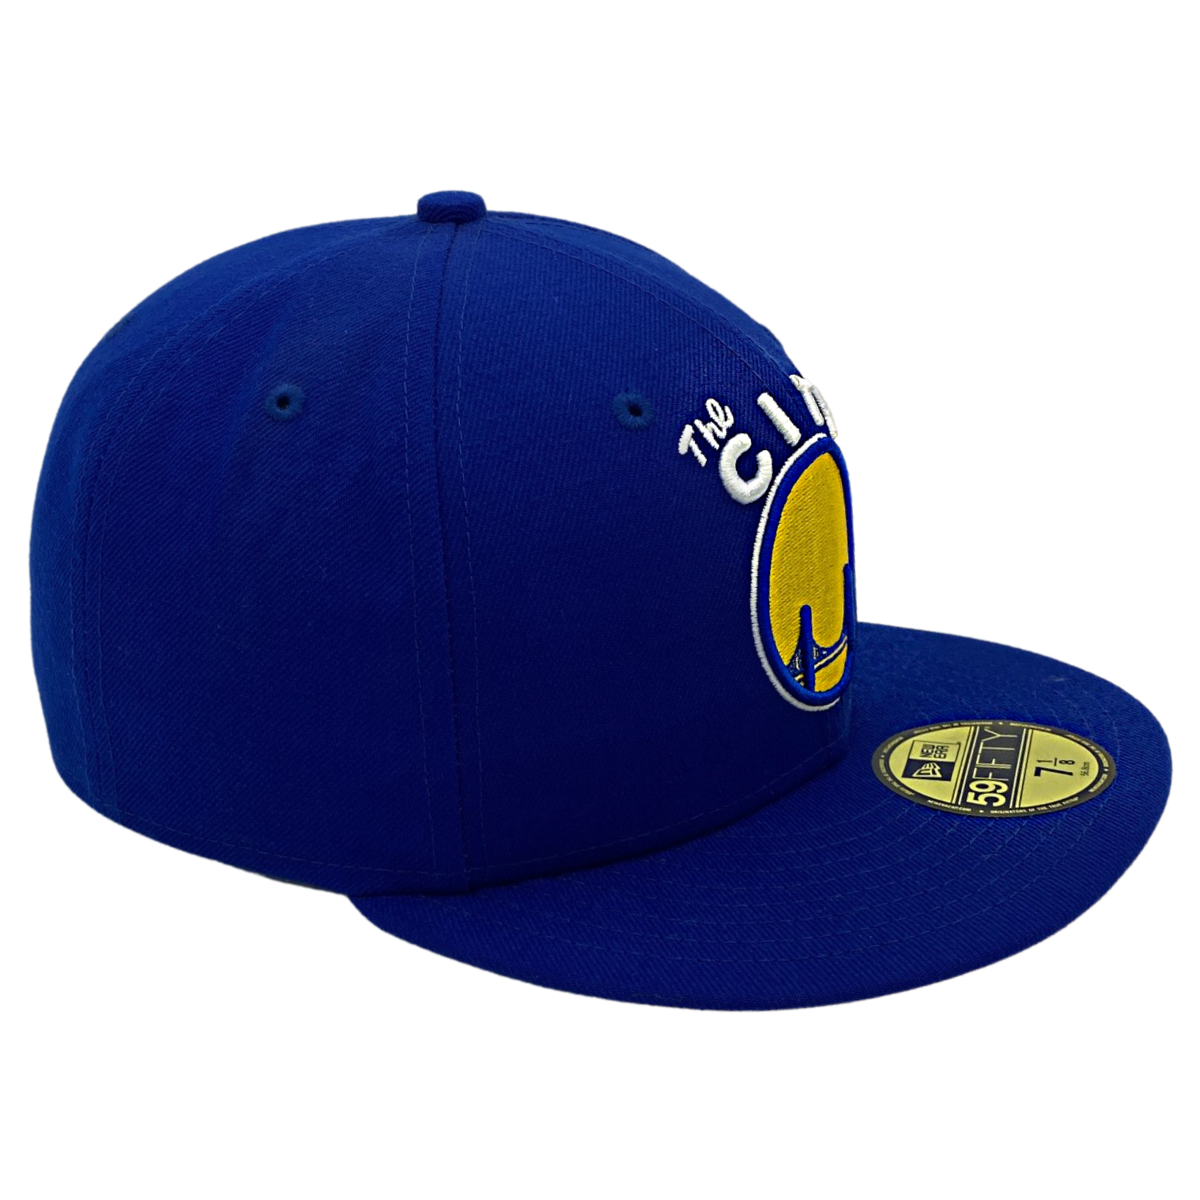 GOLDEN STATE WARRIORS THE CITY NEW ERA 59FIFTY HAT-BLUE/YELLOW Nvsoccer.com Thecoliseum